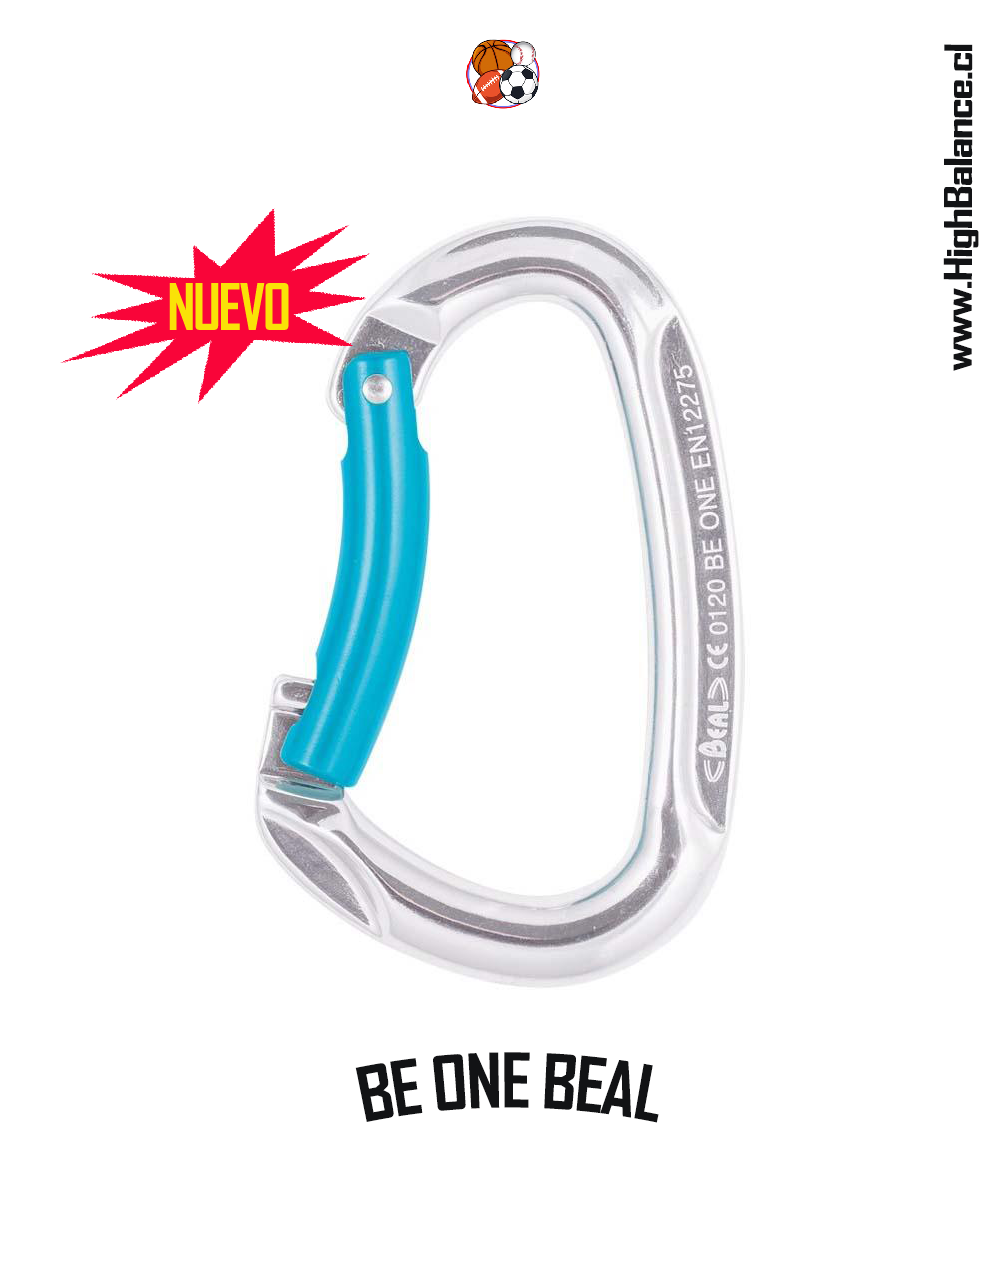 MOSQUETÓN BE ONE BEAL (OFERTA)